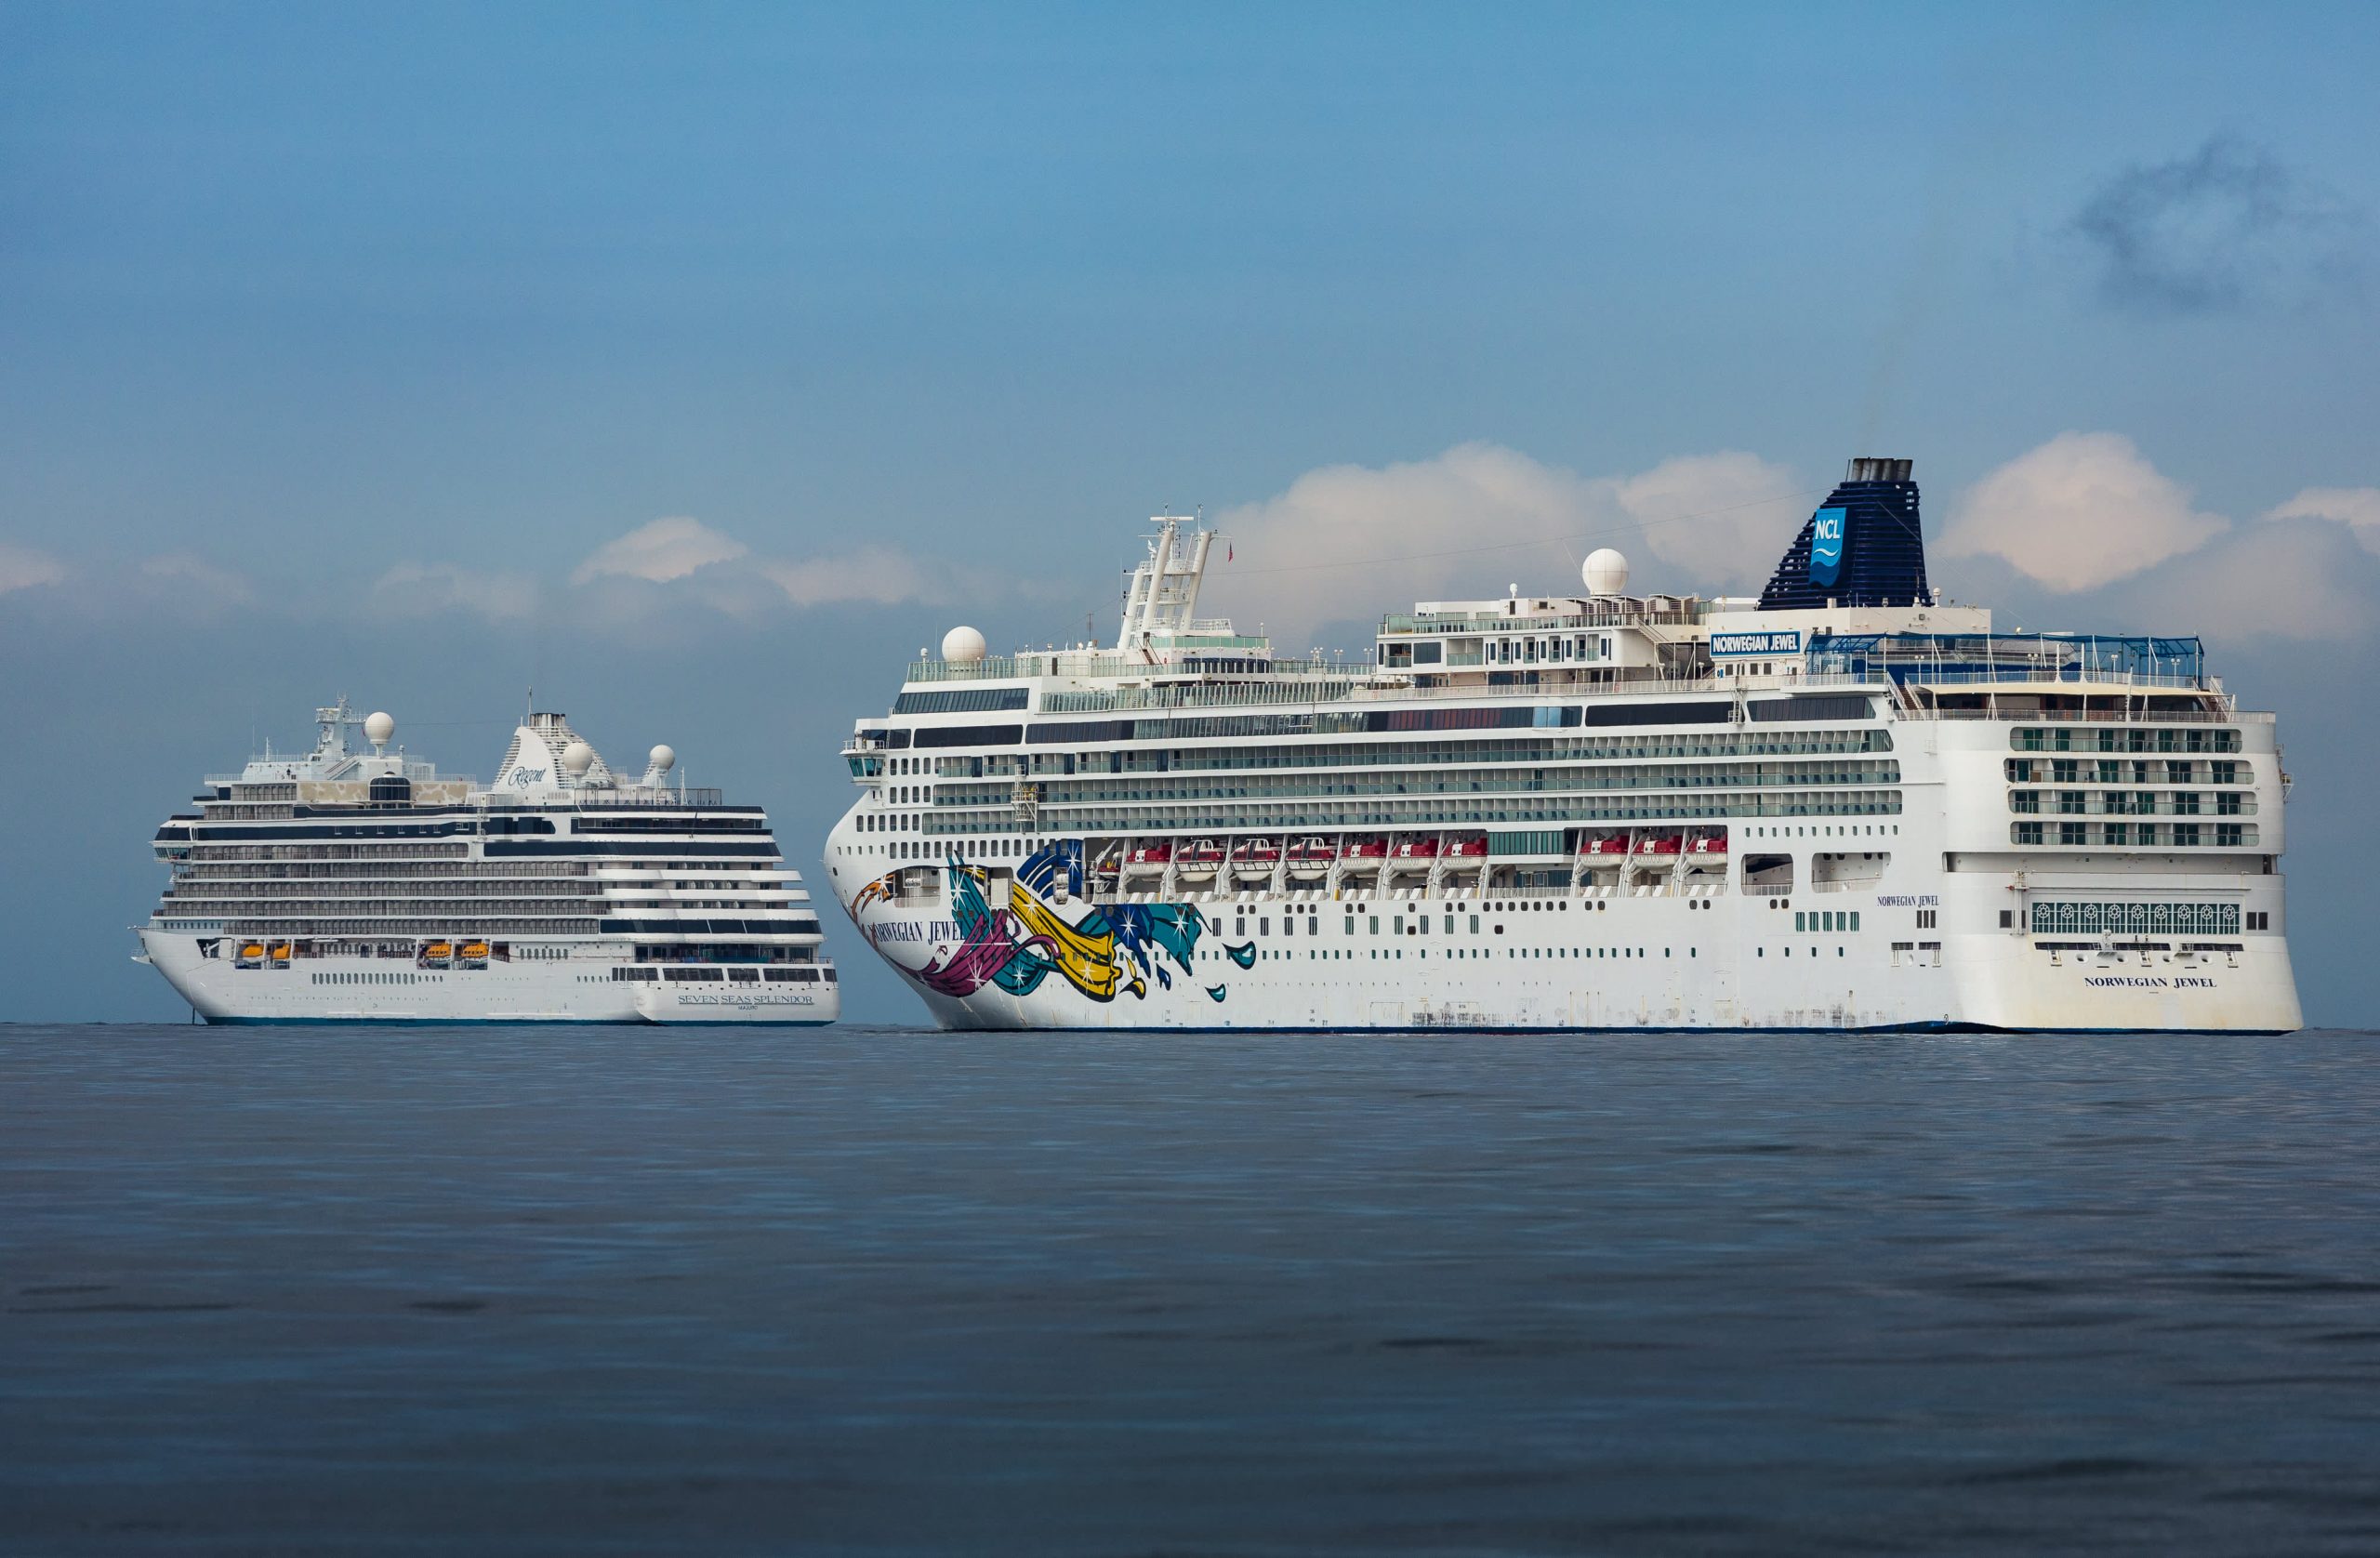 Norwegian Cruise Line CEO talks about how the company's cruise ships are safely sailing again